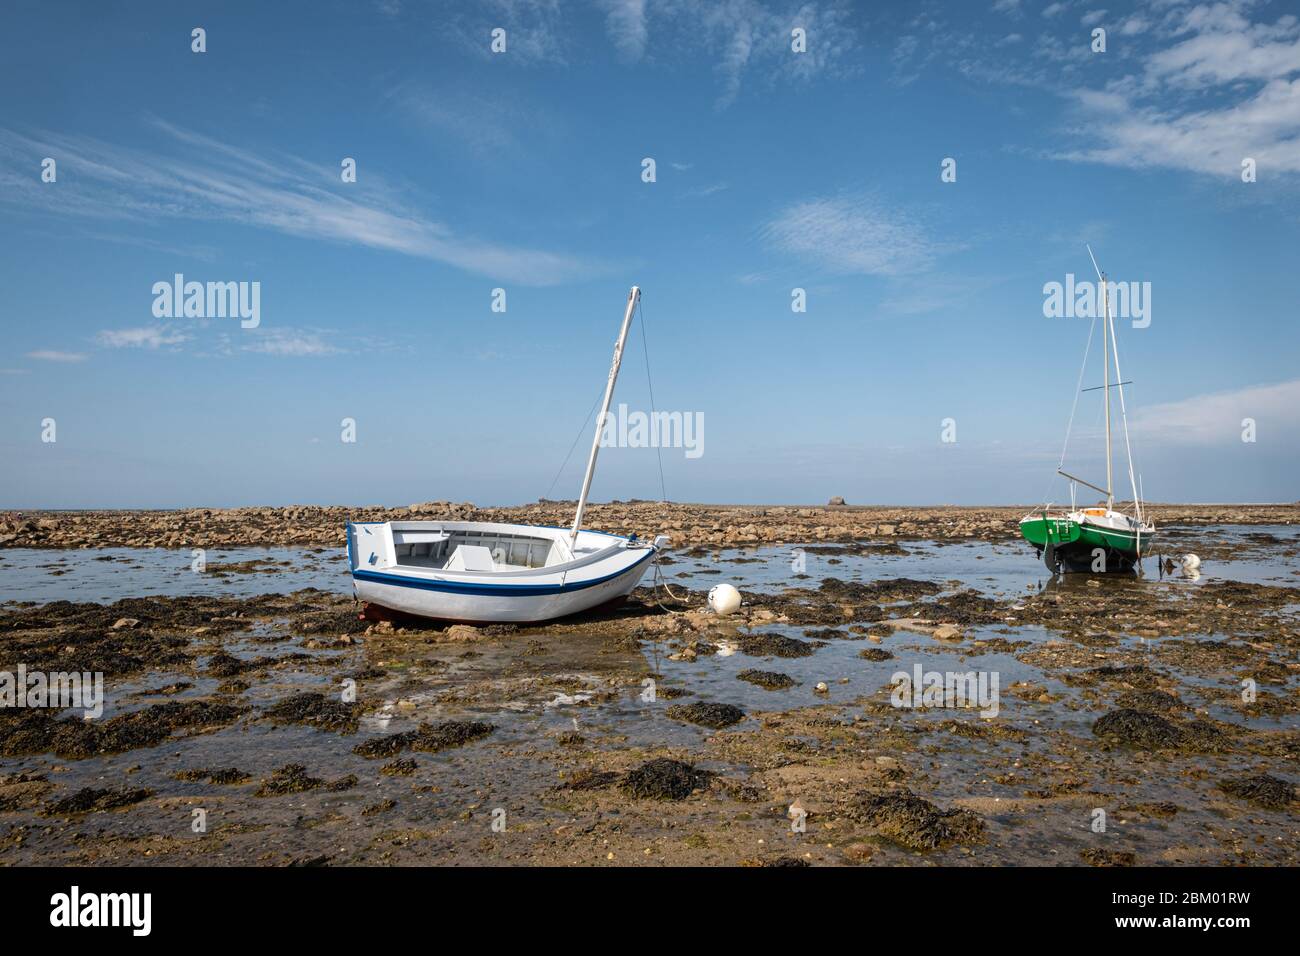 August 03, 2019, Côte d'Armor, Brittany, France-Boats on the sand at low tide in Brittany. Stock Photo